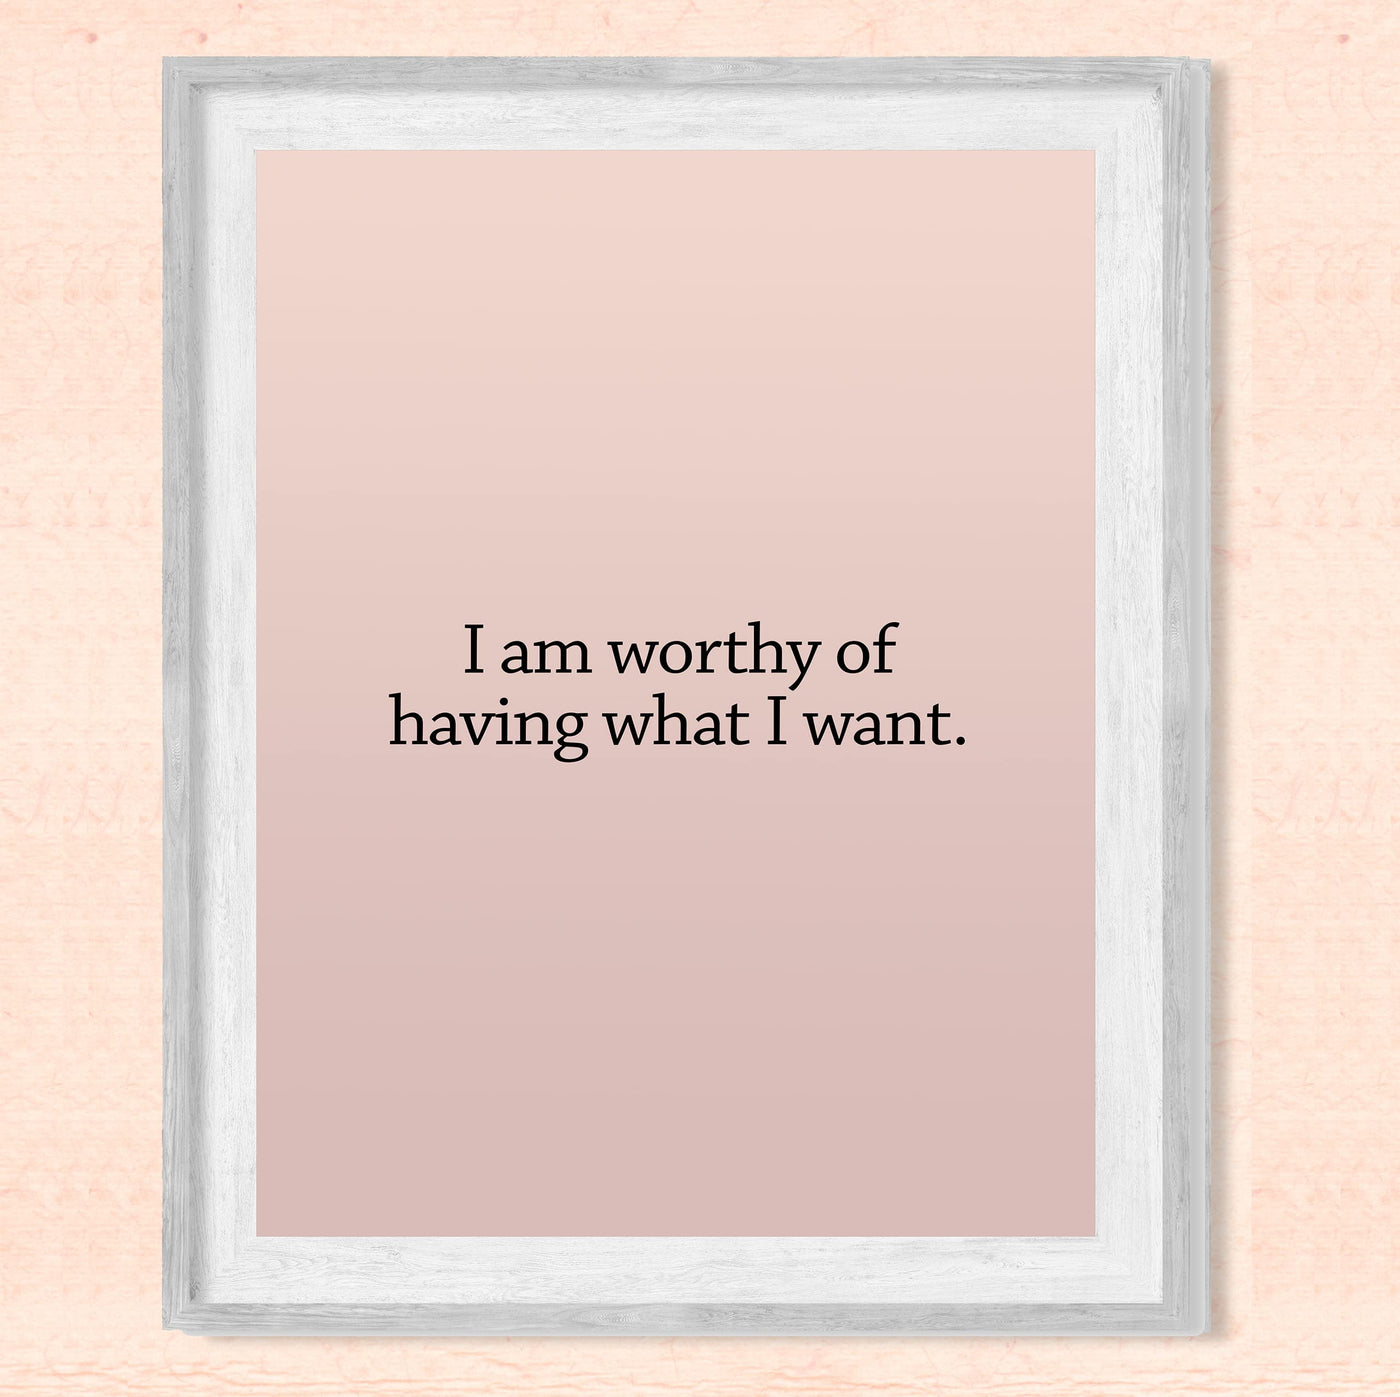 I Am Worthy Of Having What I Want- Inspirational Wall Art -8 x 10" Motivational Quotes Wall Print -Ready to Frame. Modern Decor for Home-Office-School-Teen-Christian. Great Sign for Confidence!